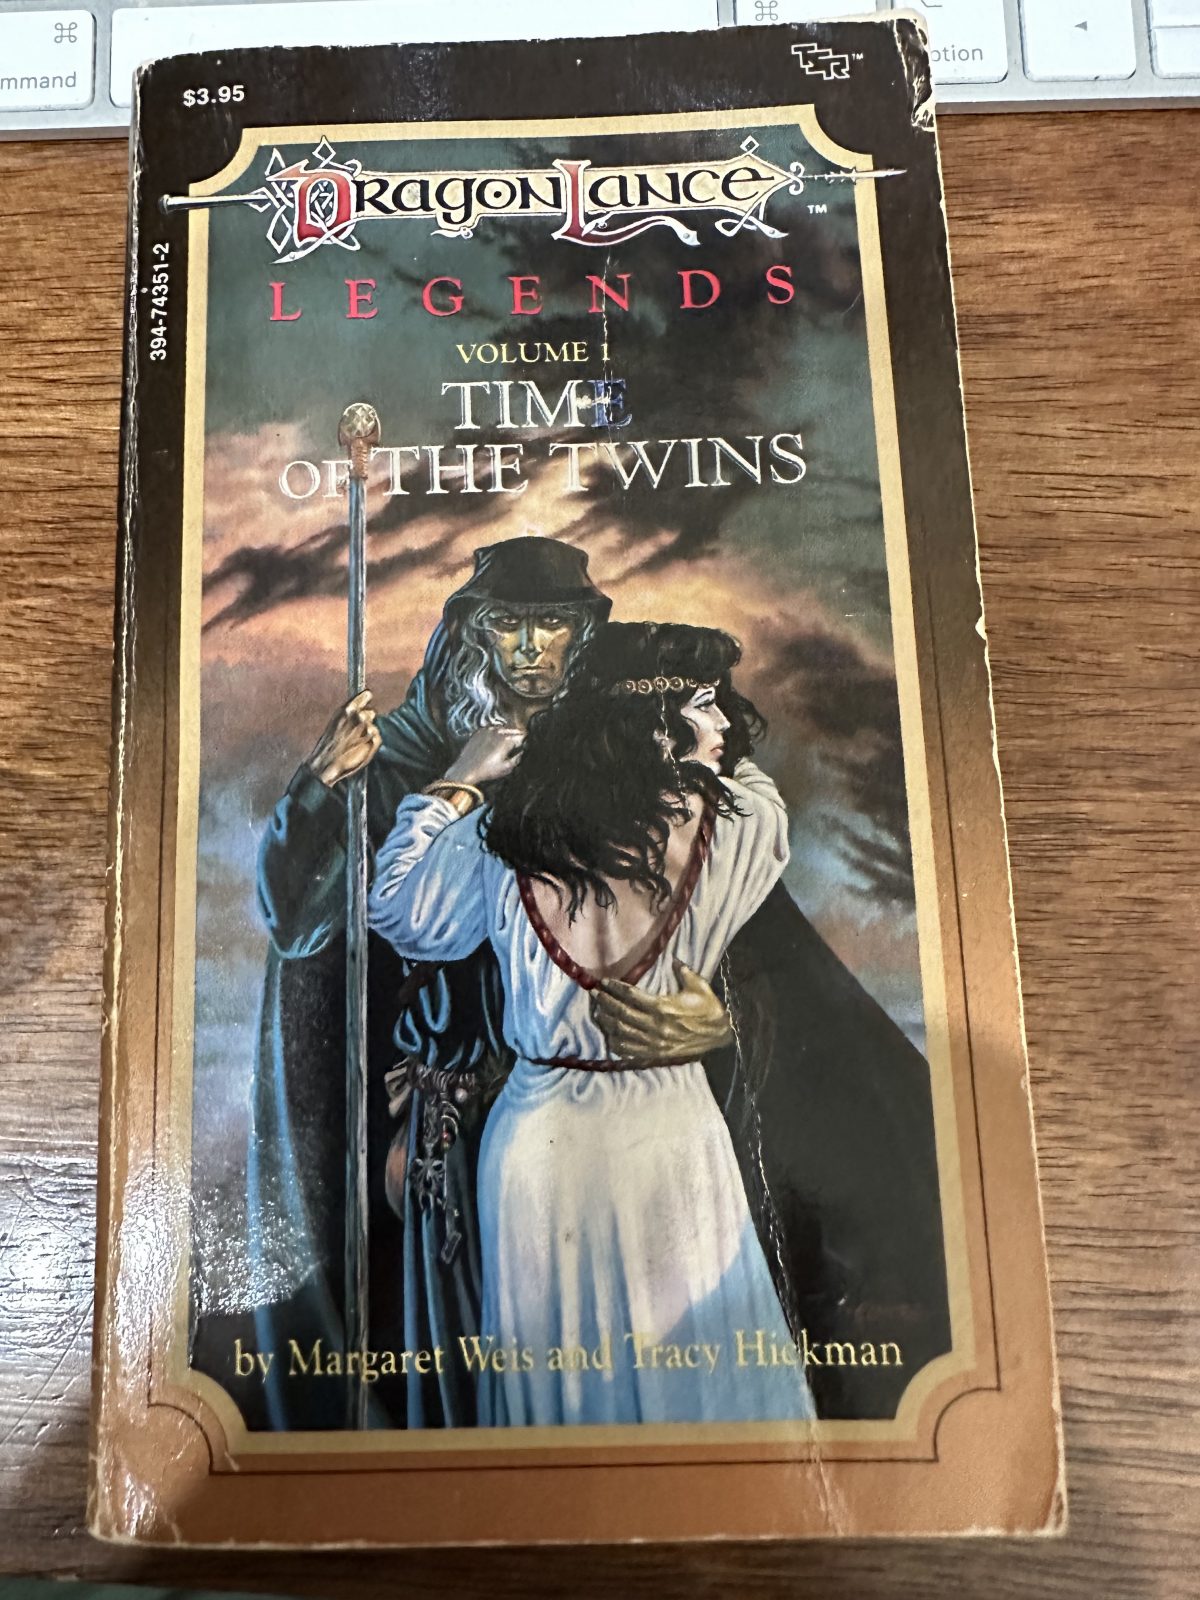 DragonLance Legends Vol 1 Time of the Twins